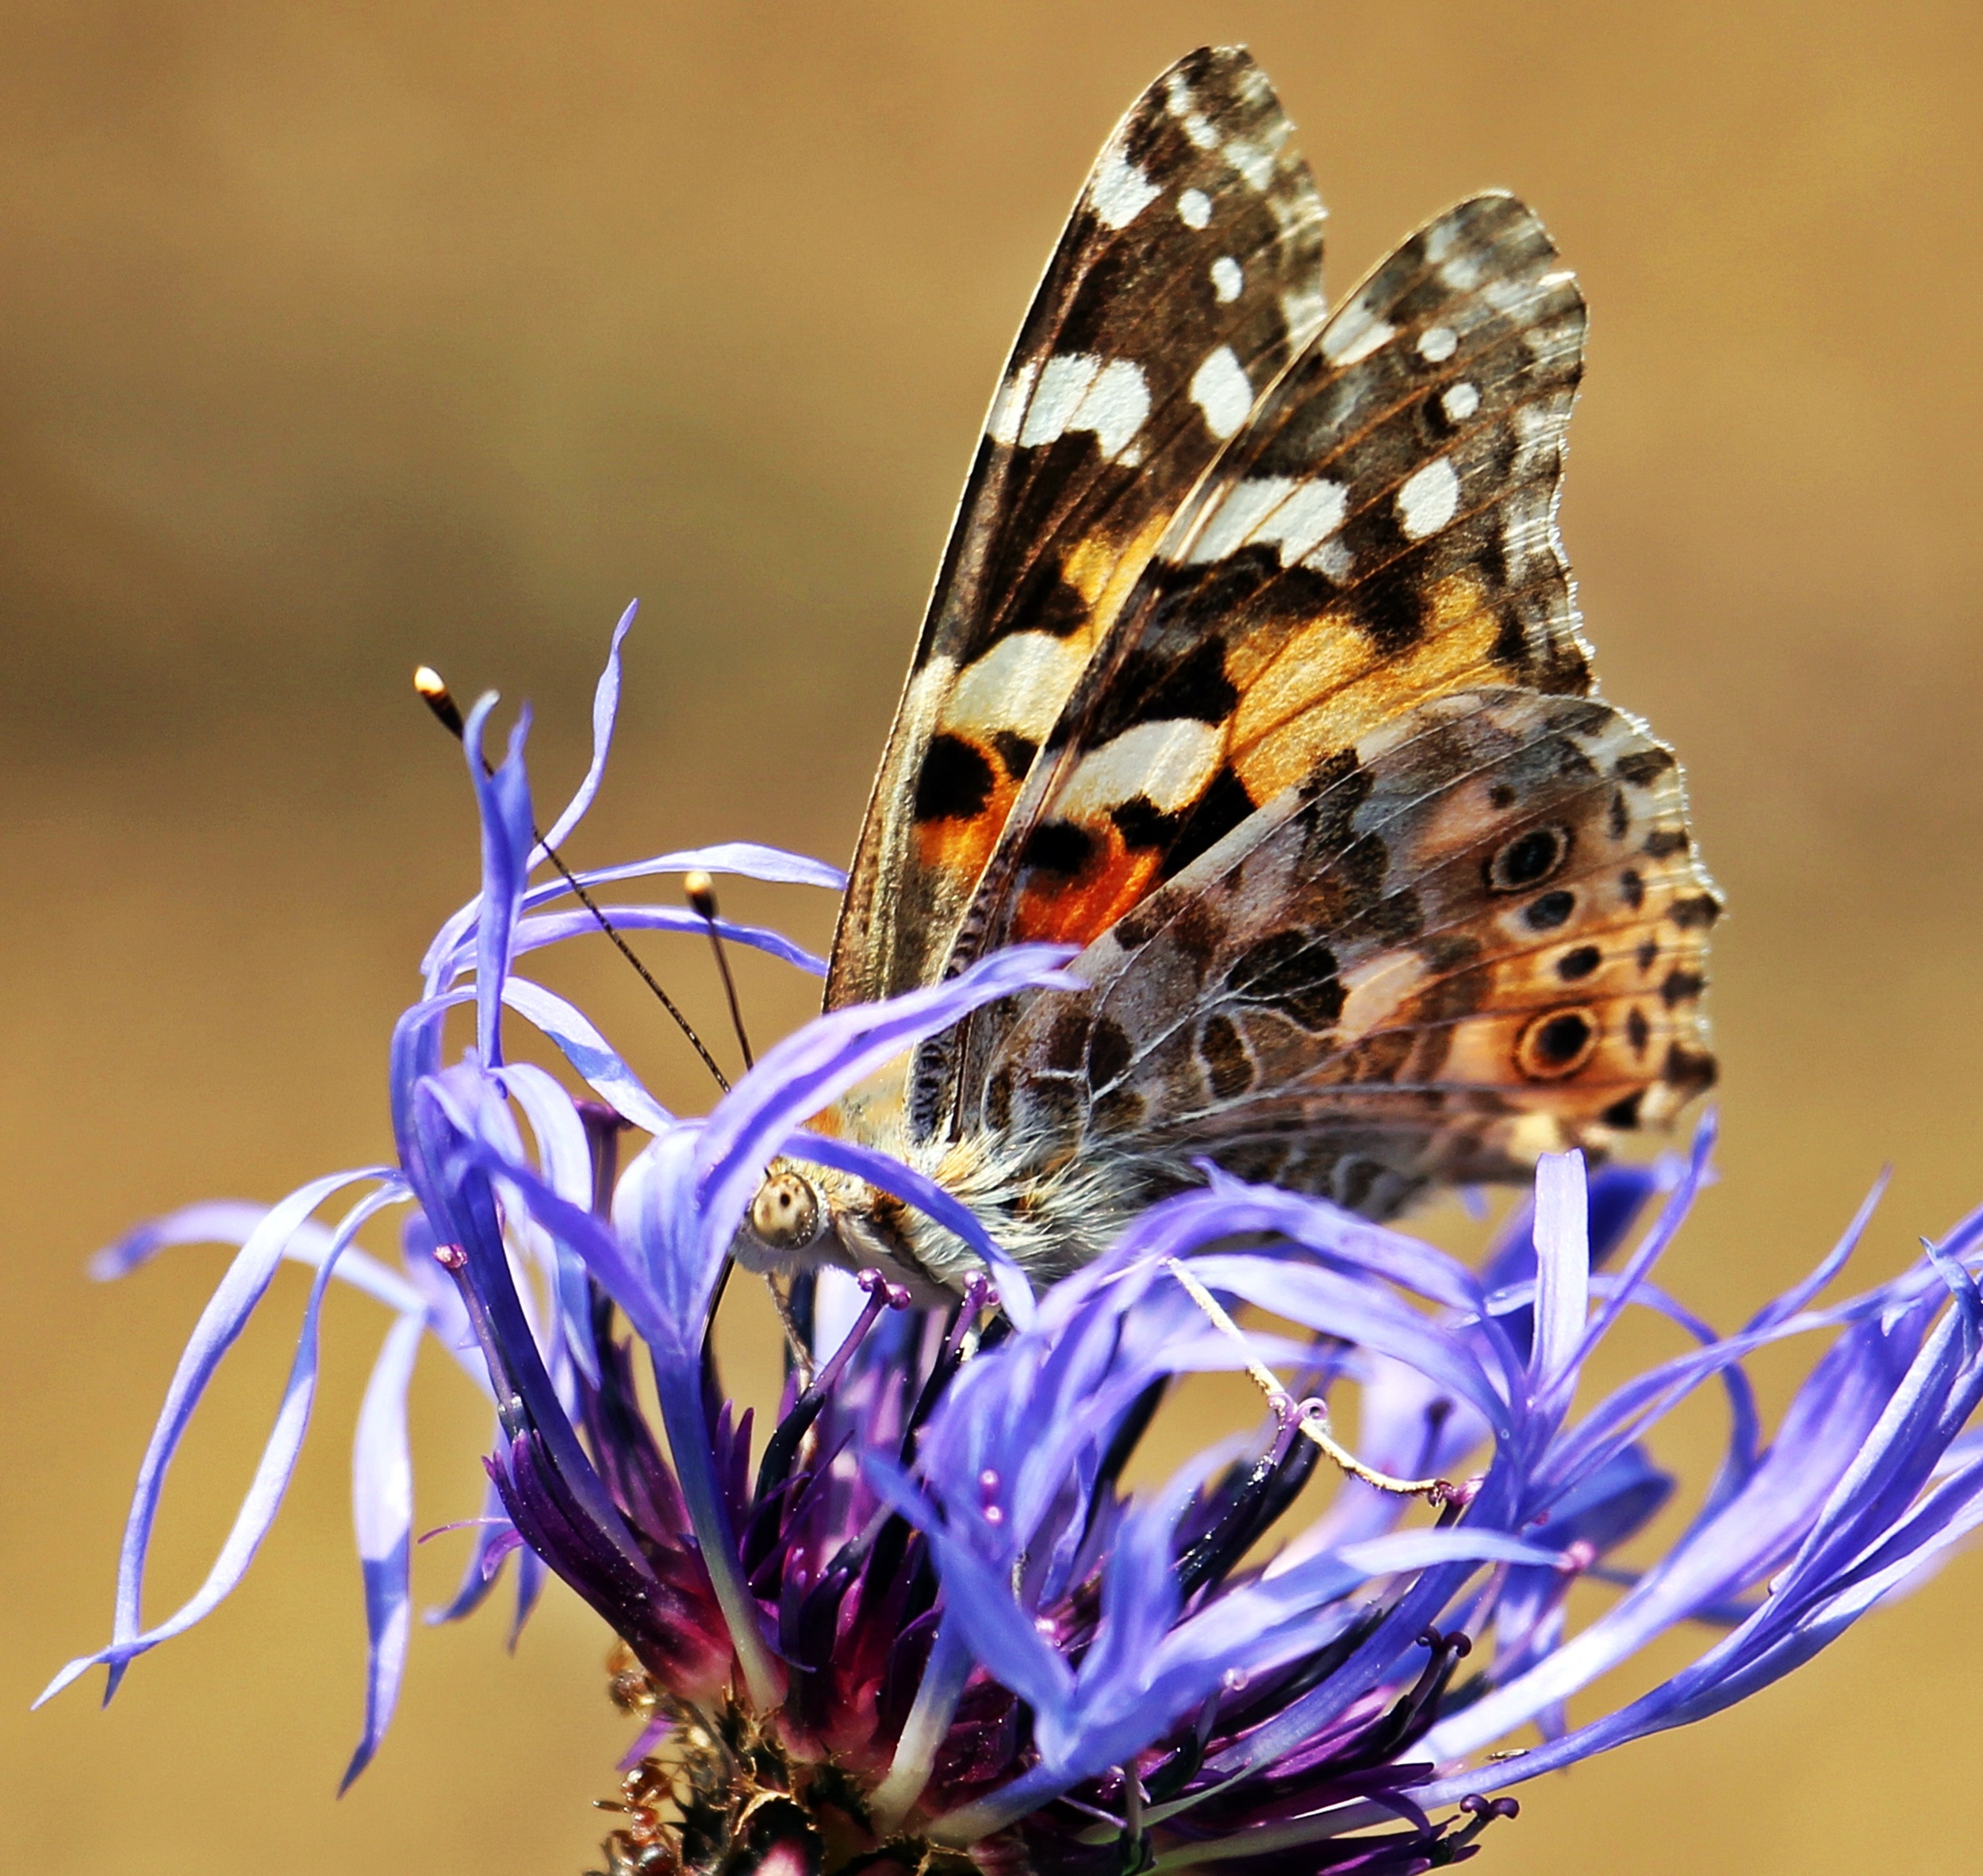 Butterfly on the Flower, Animal, Blooming, Butterfly, Flower, HQ Photo